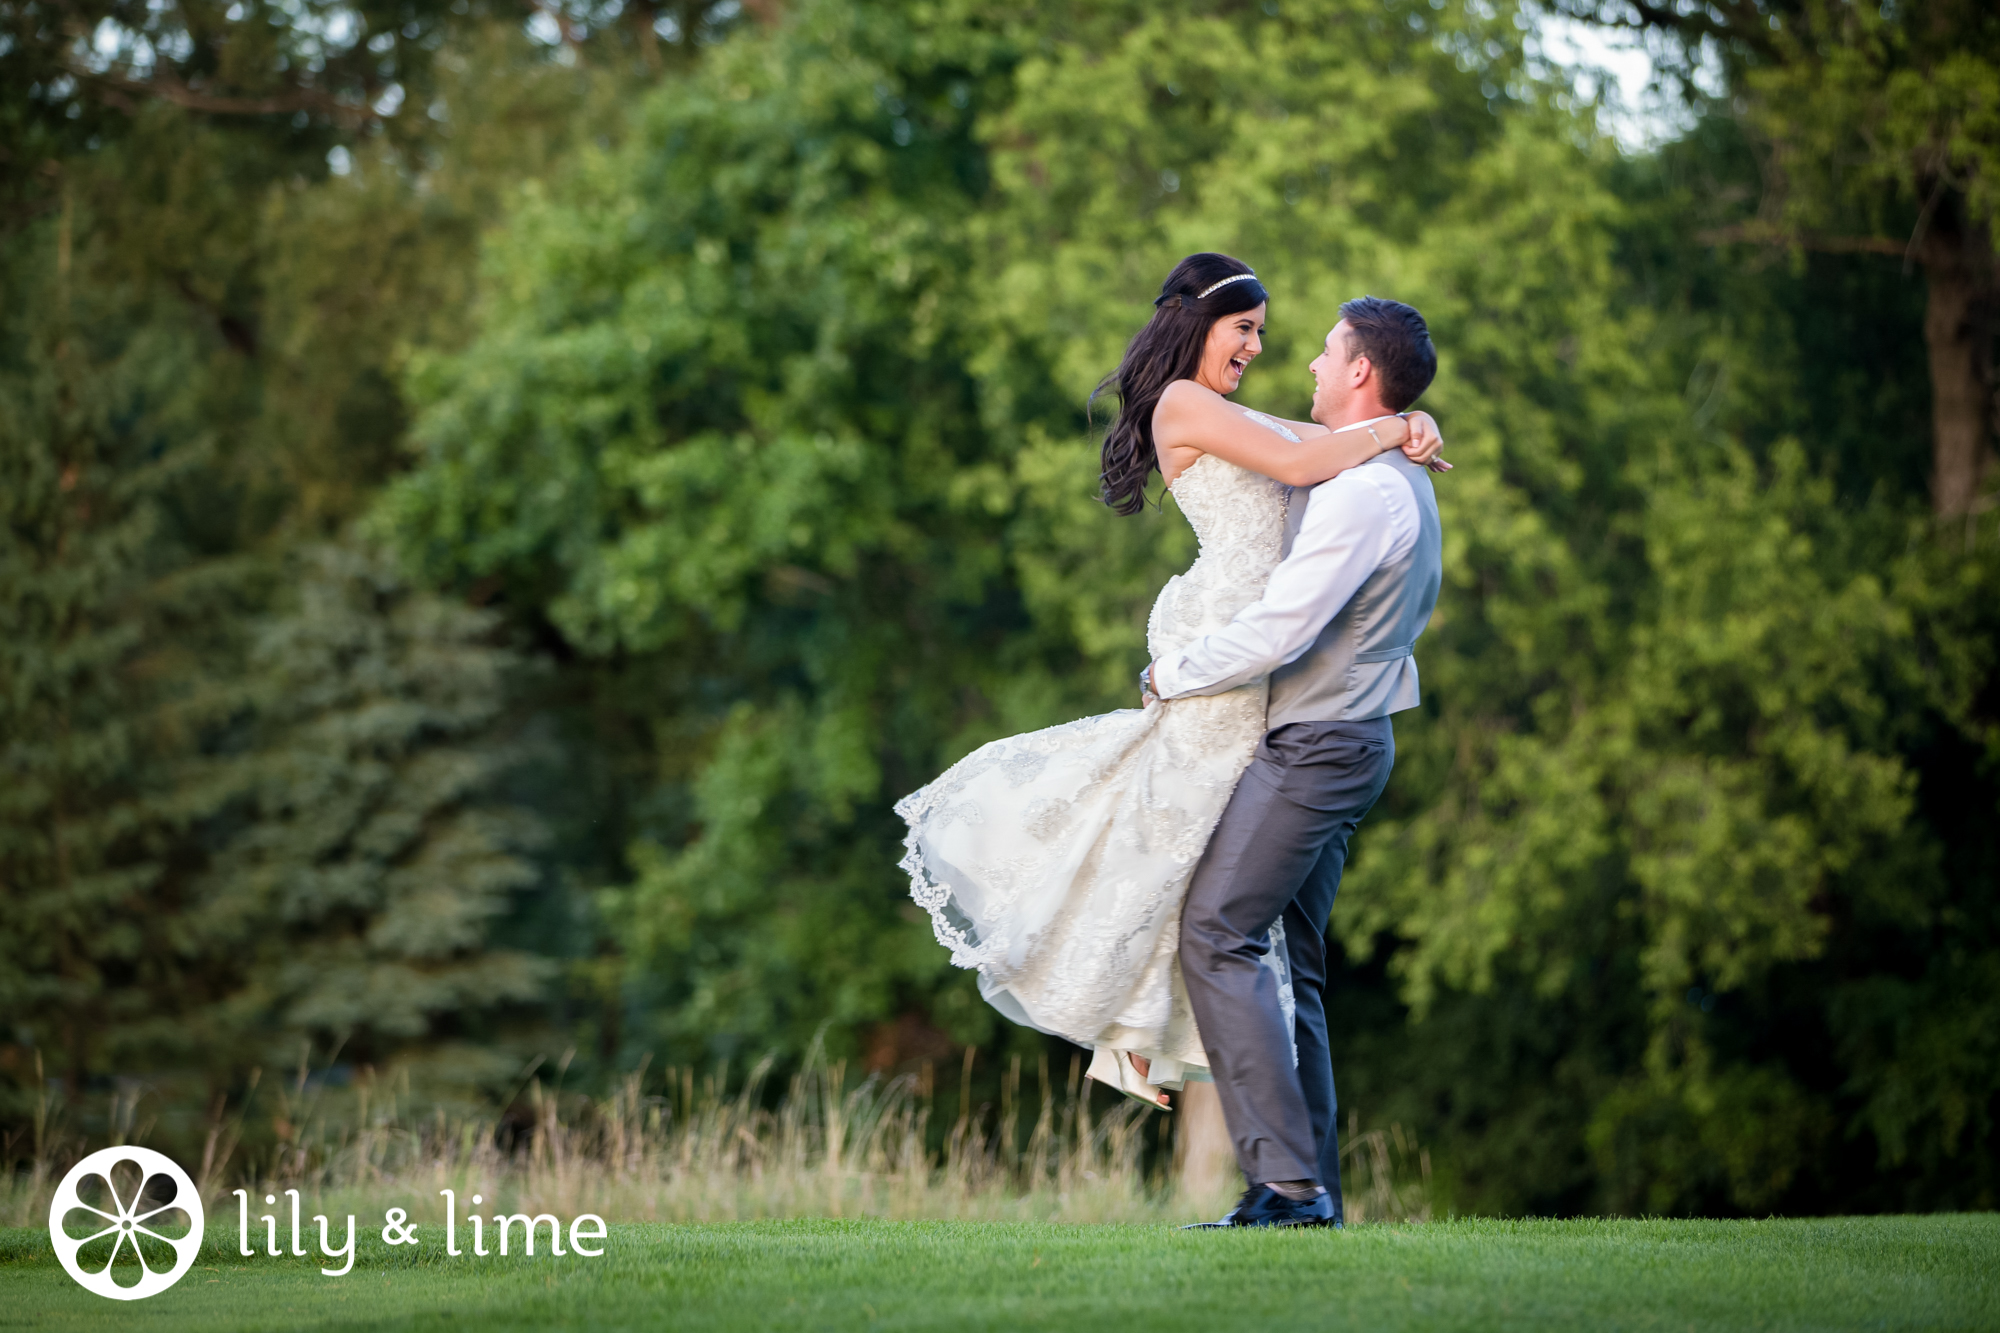 a new approach to finding the perfect wedding photographer